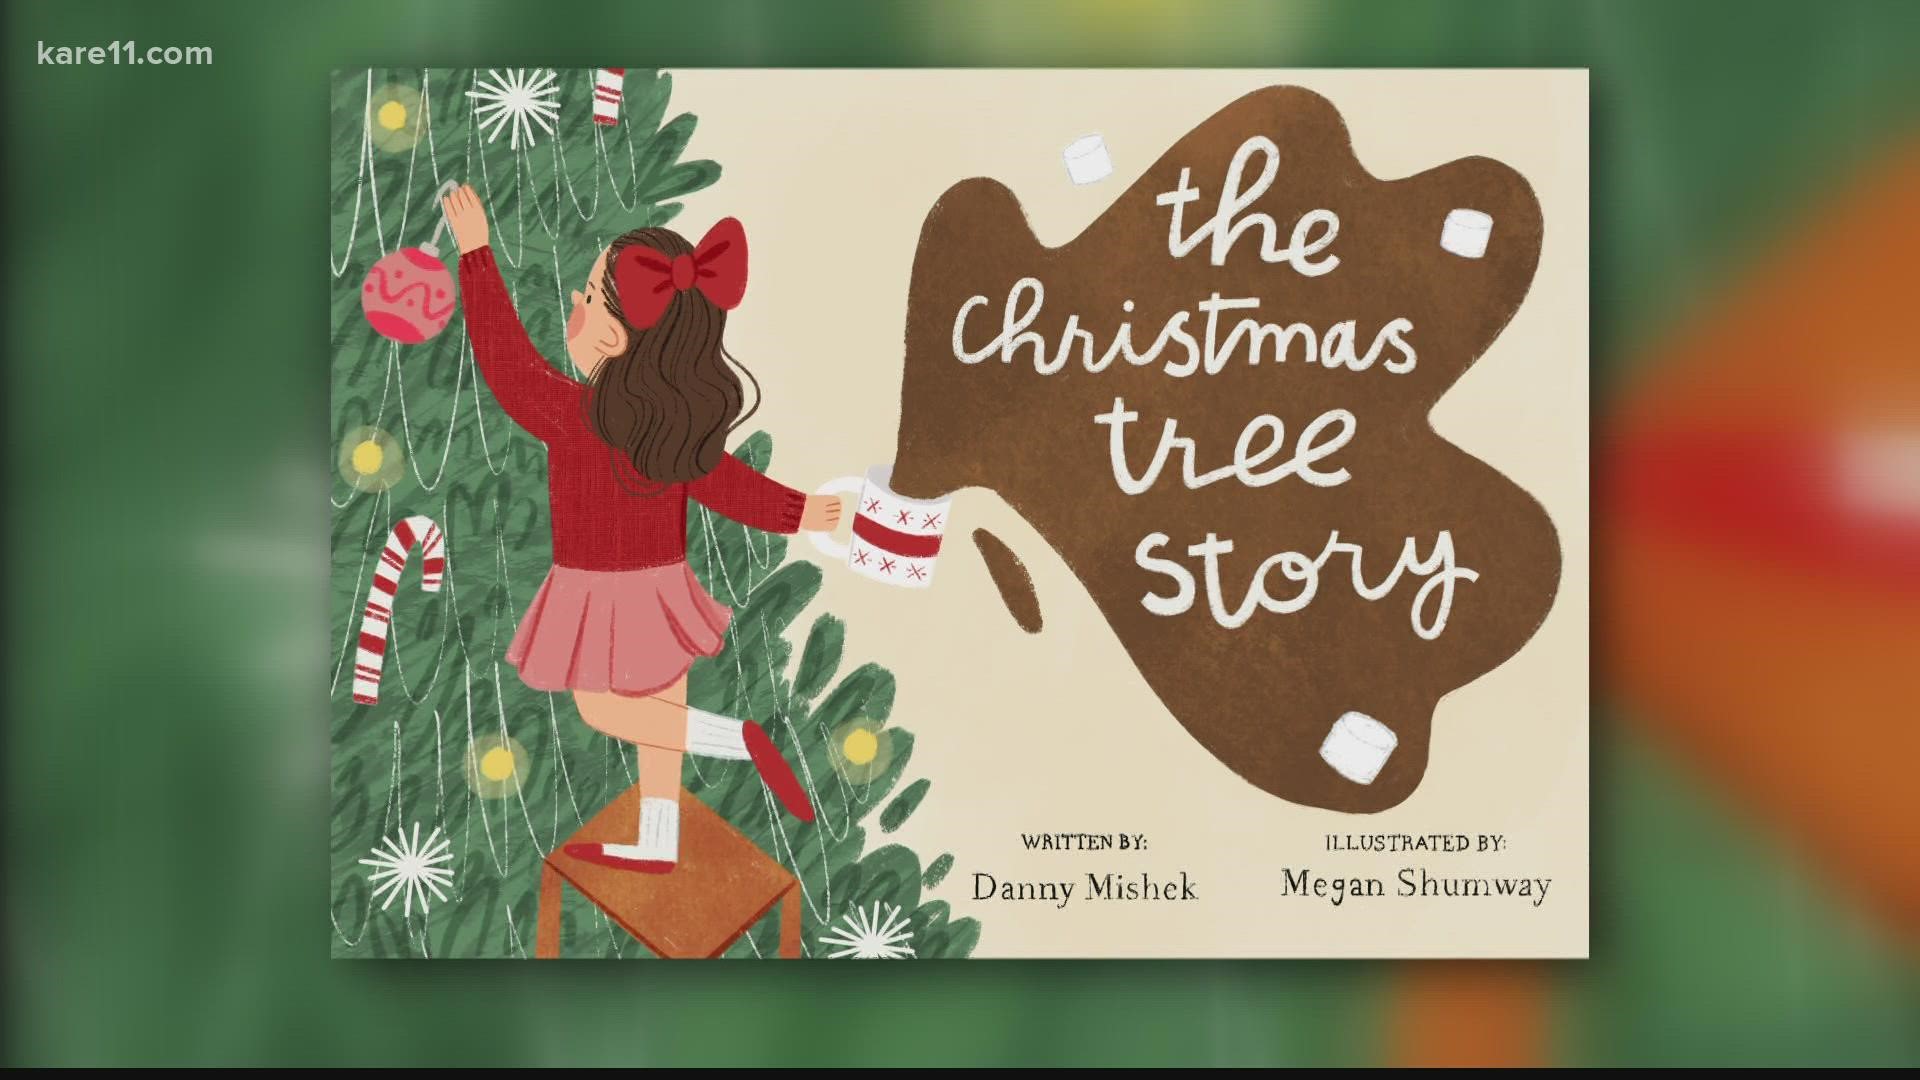 Author, Danny Mishek, talks about his new children's book, "The Christmas Tree Story."